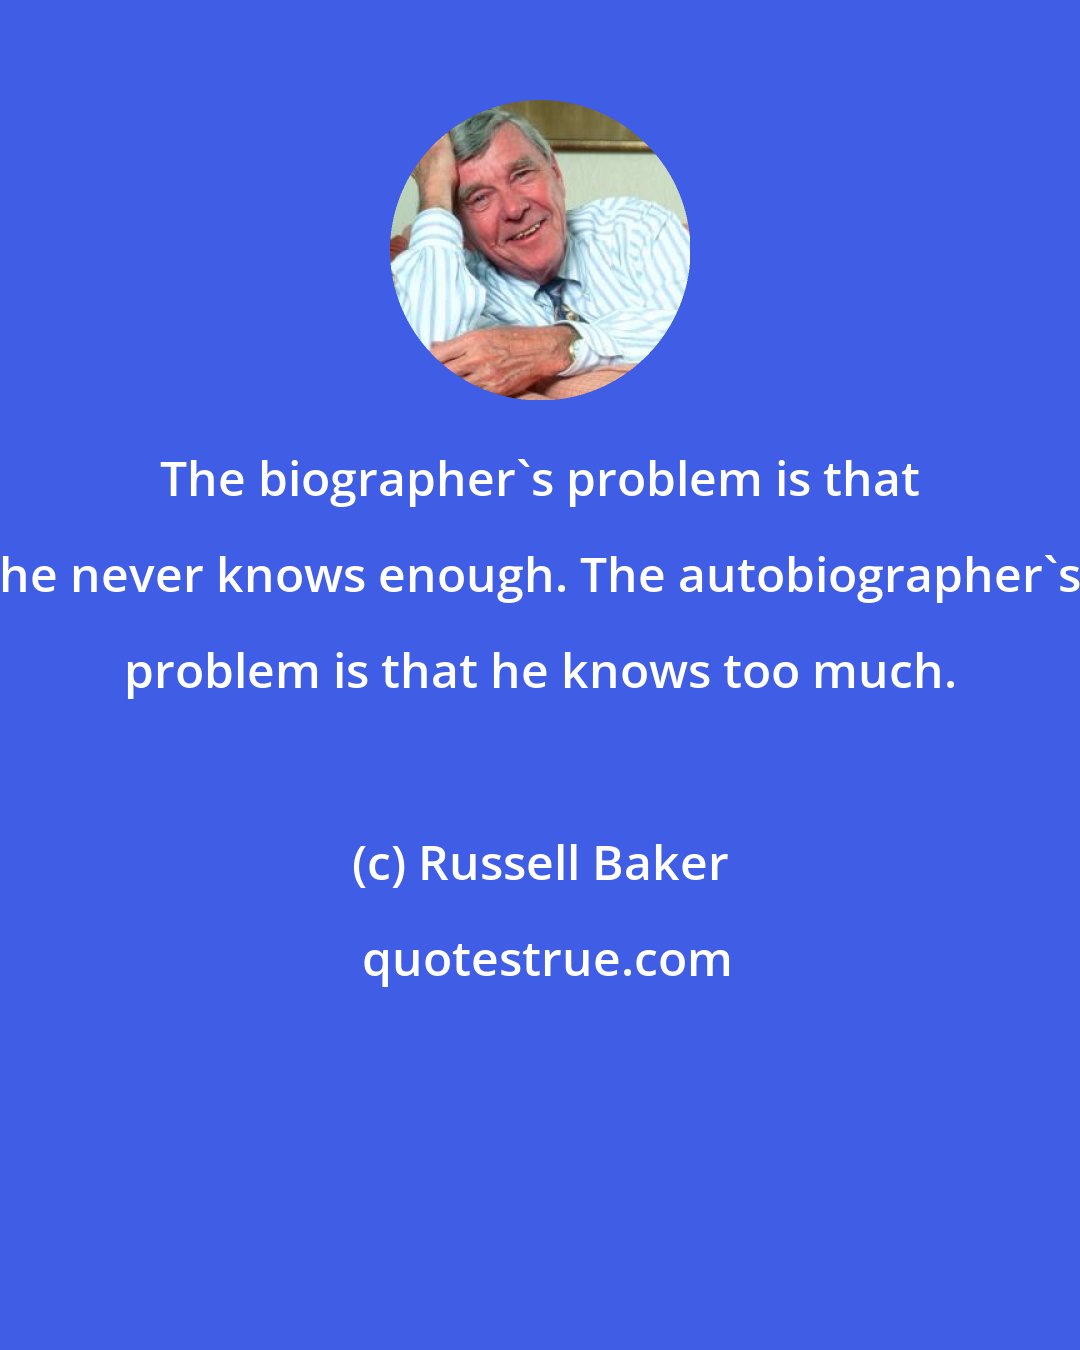 Russell Baker: The biographer's problem is that he never knows enough. The autobiographer's problem is that he knows too much.